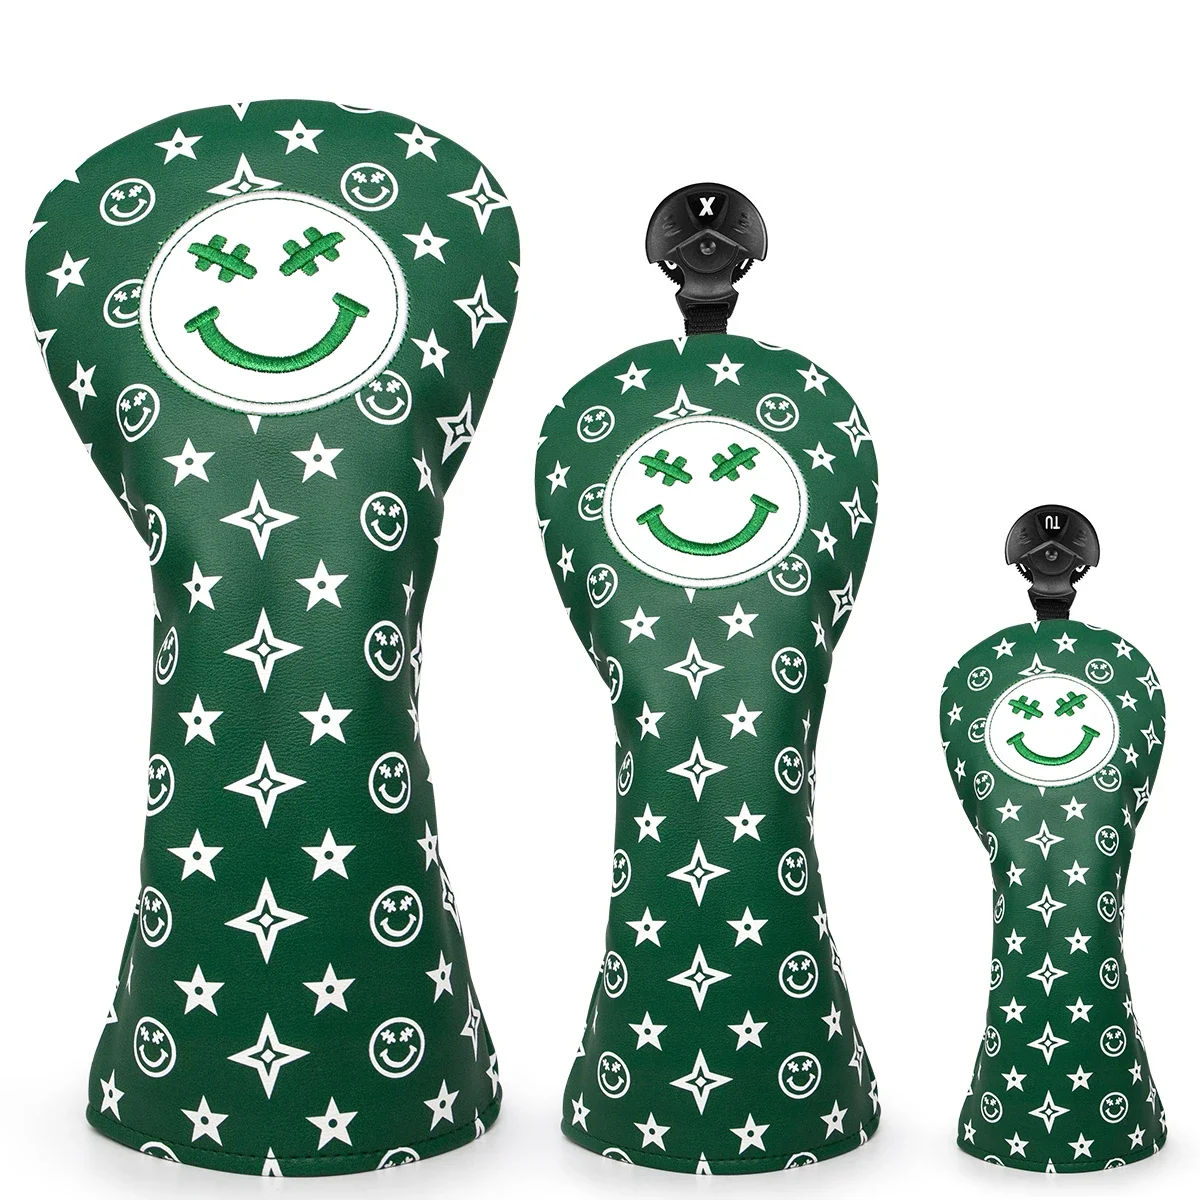 

Stars and Smiles Golf Club Covers for Driver Fairway, Hybrids 4 Options Golf Driver Headcover/ Golf Fairway Wood Head Cover/